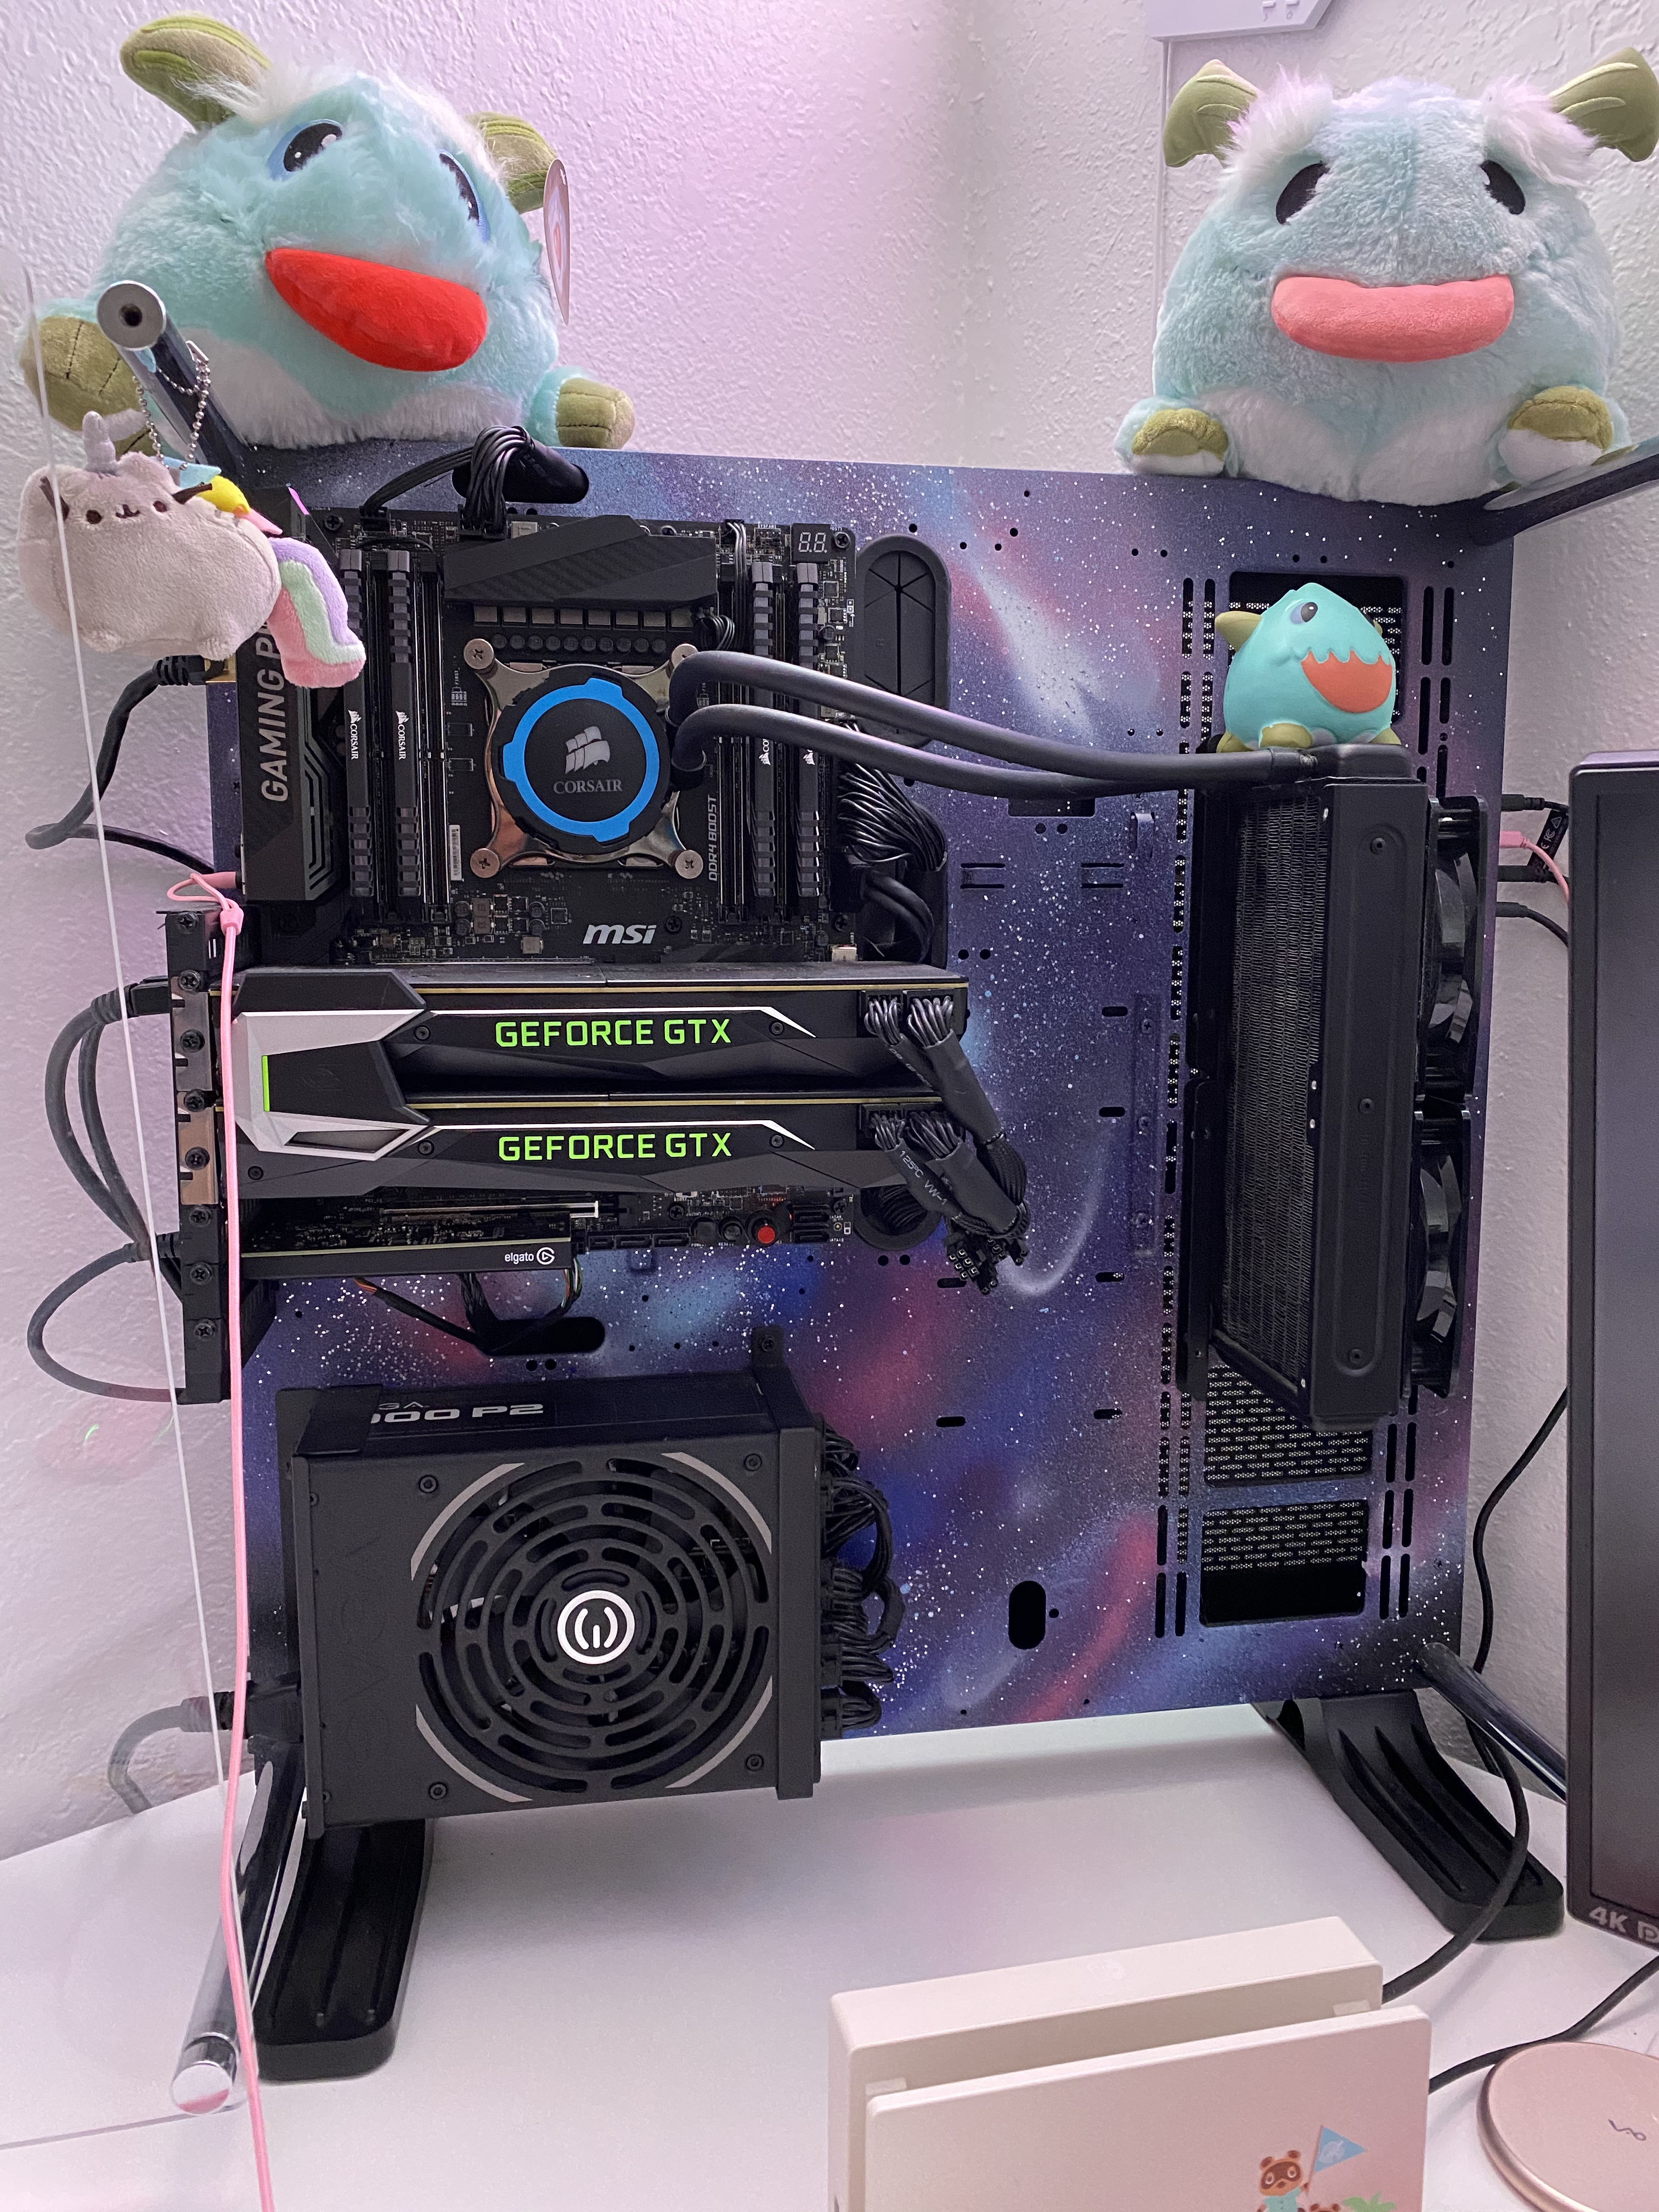 Image of Emilie's gaming PC